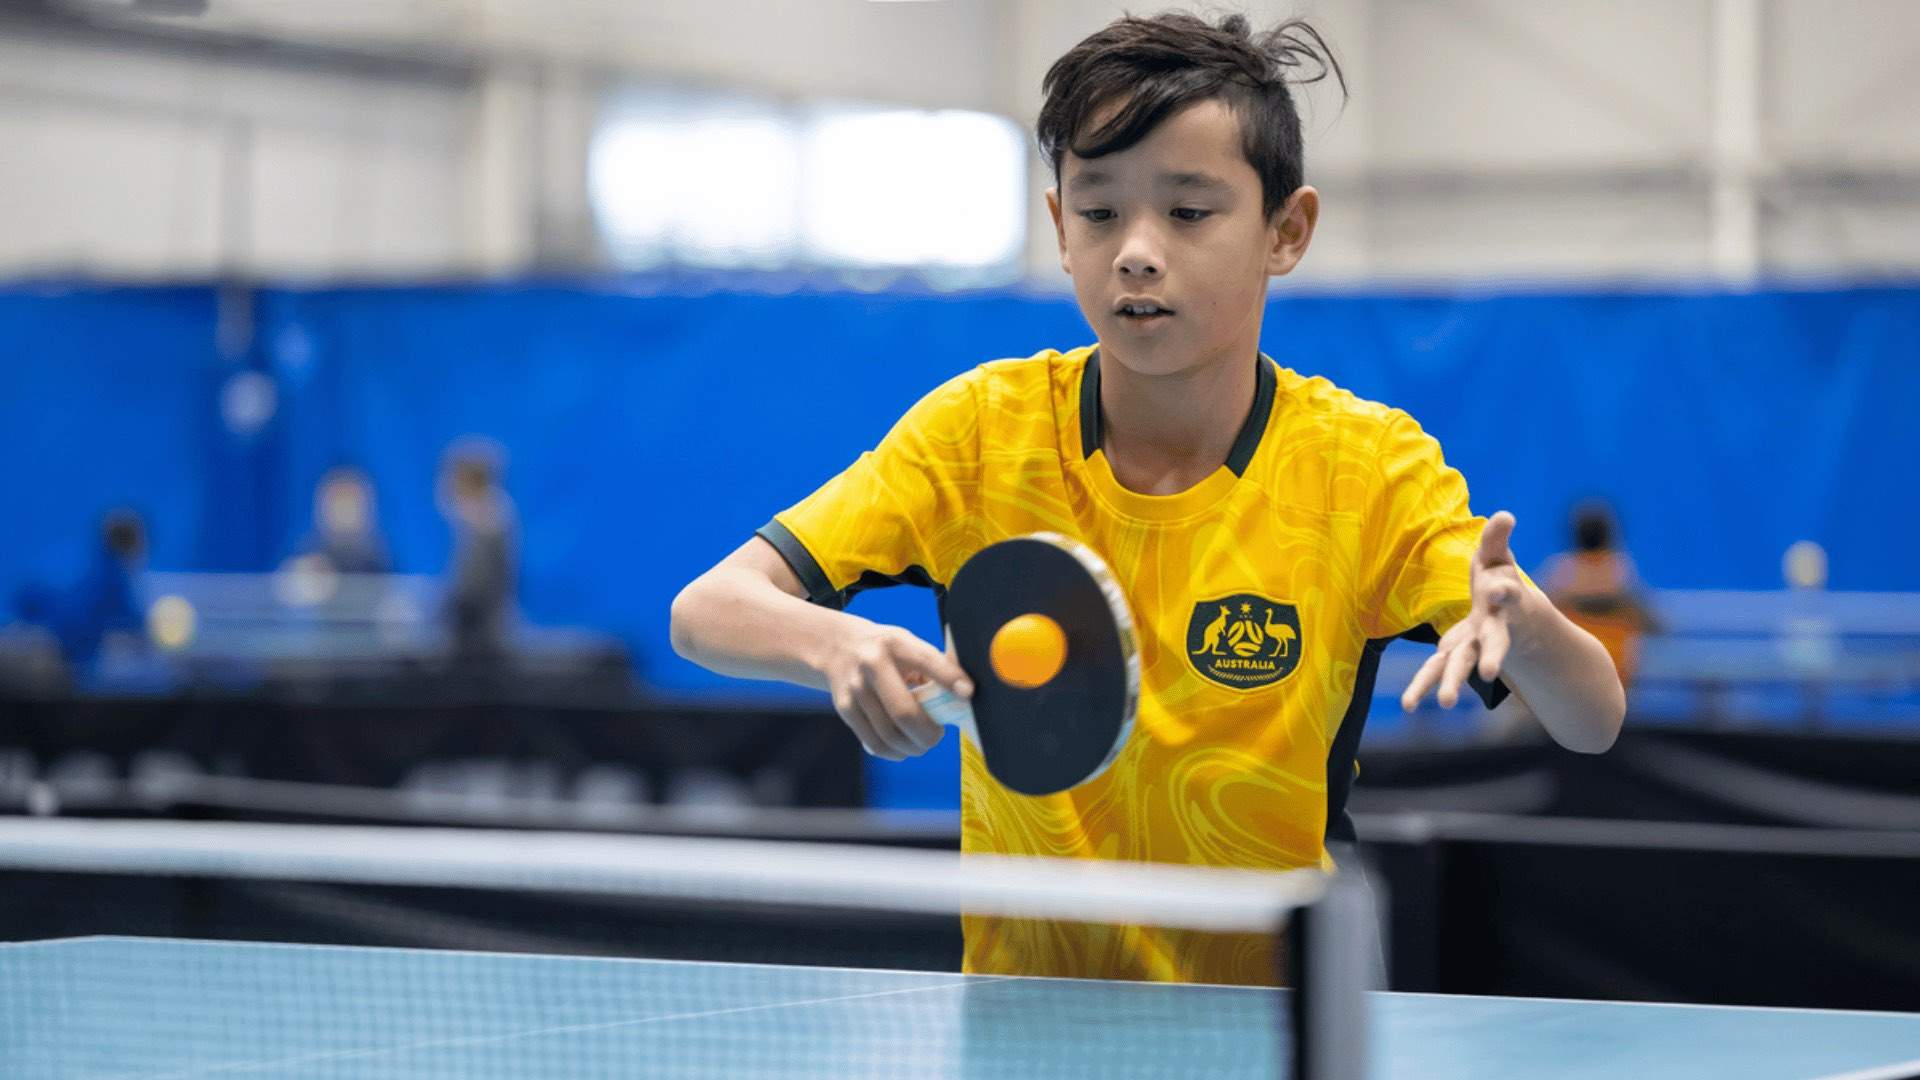 A boy playing table tennis.